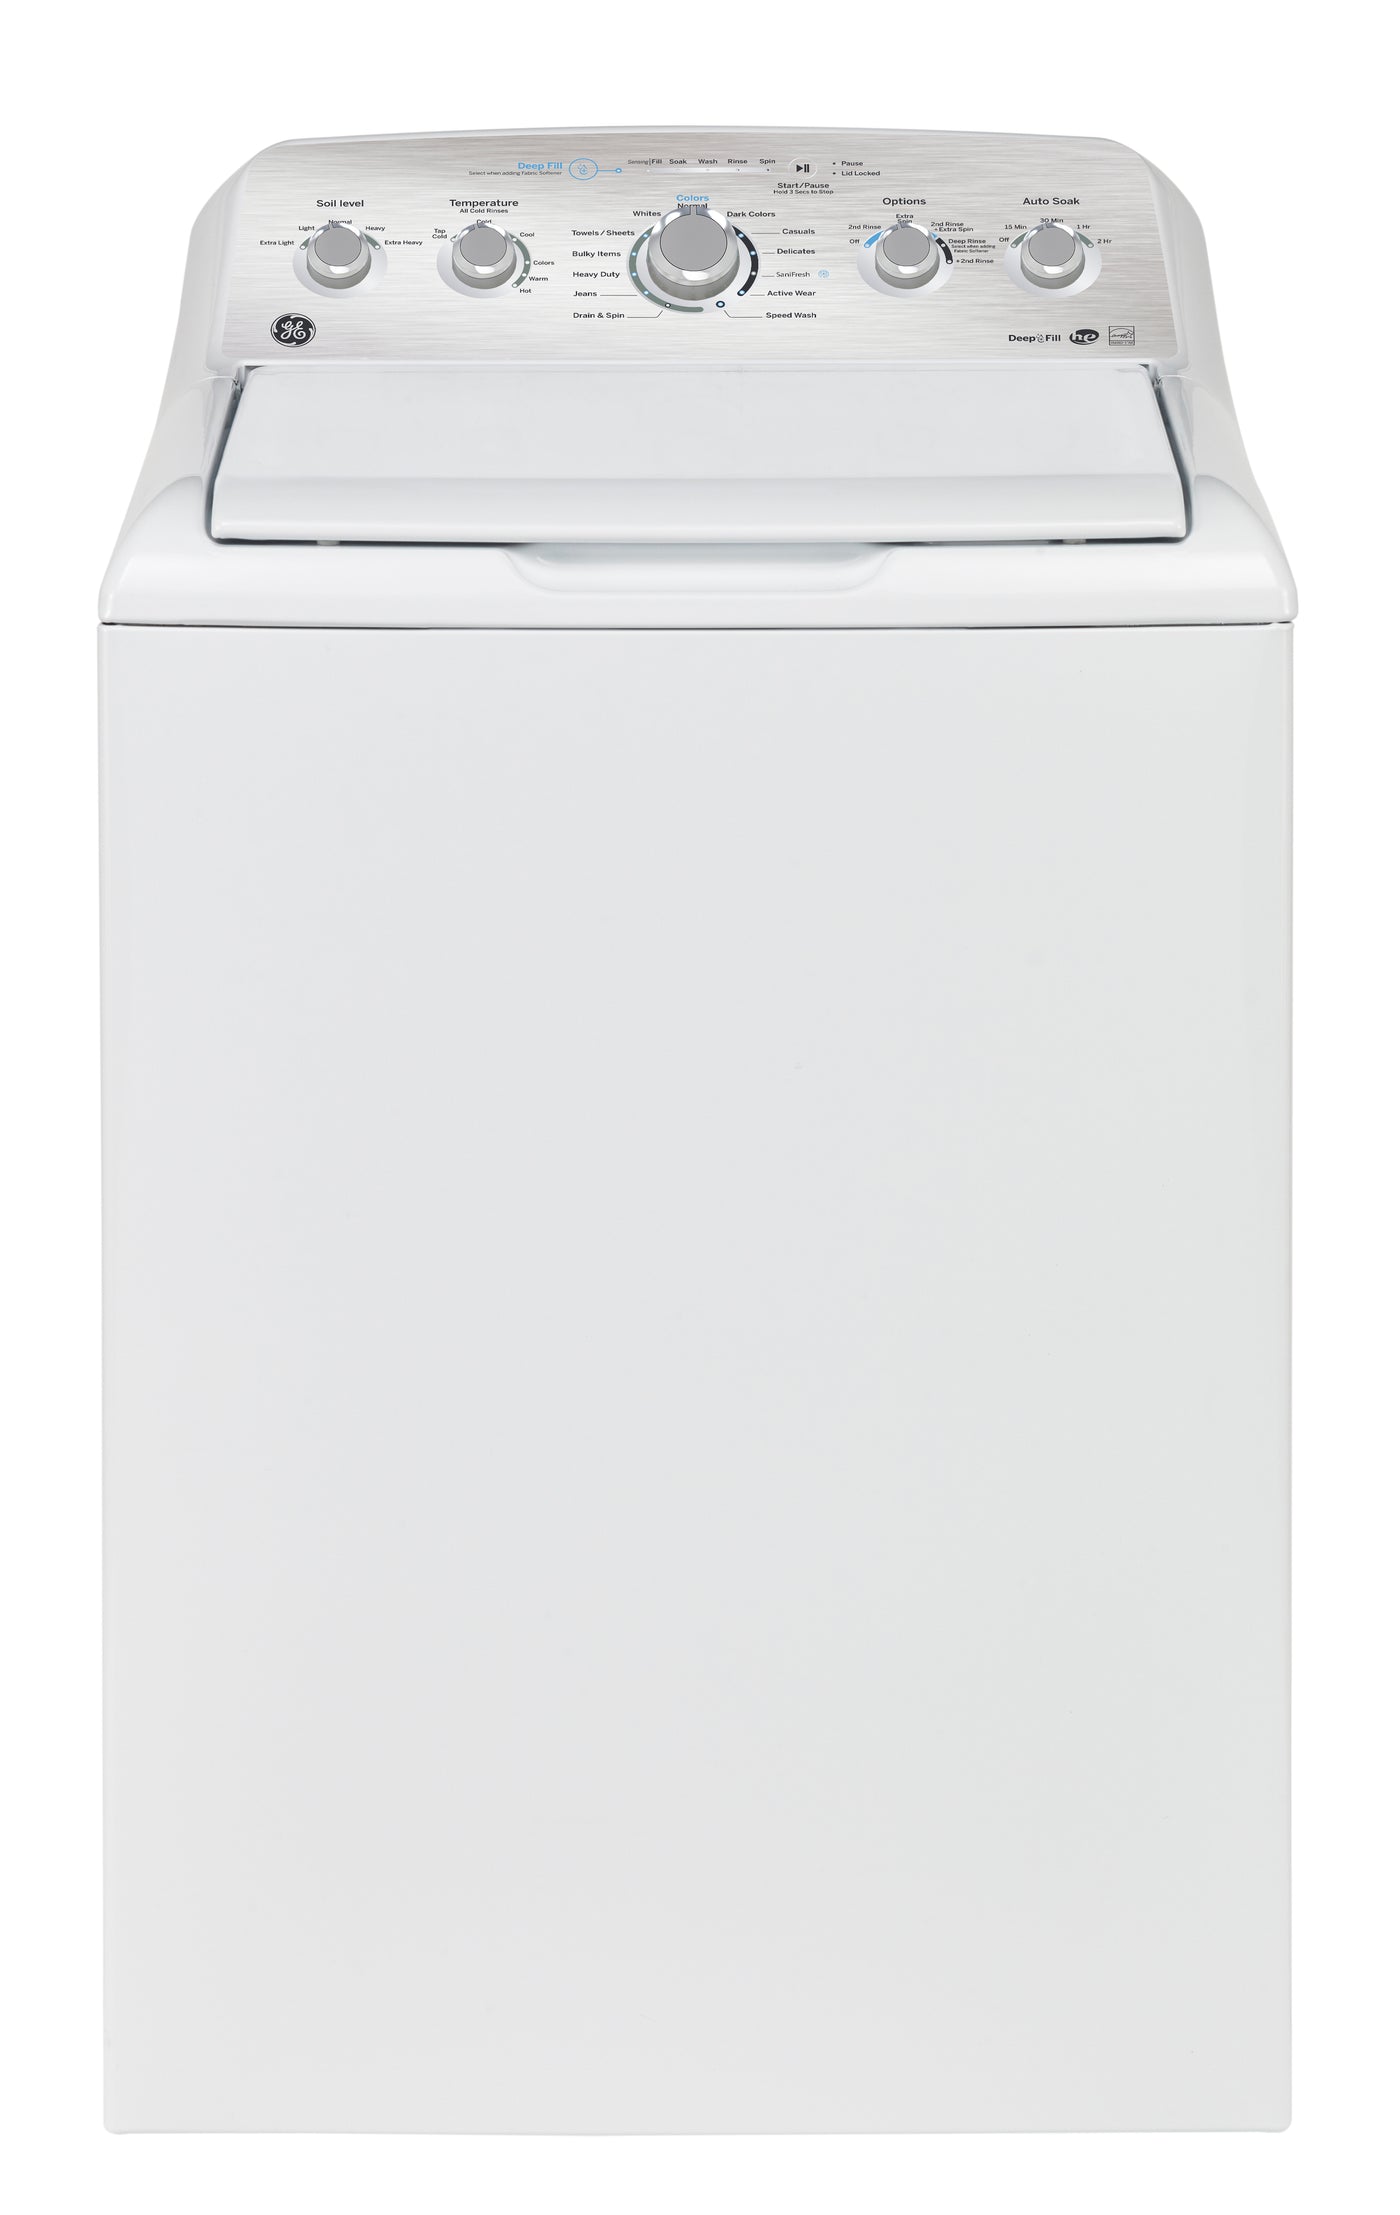 GE White Top-Load Washer with SaniFresh Cycle (4.9 Cu. Ft.) - GTW490BMRWS